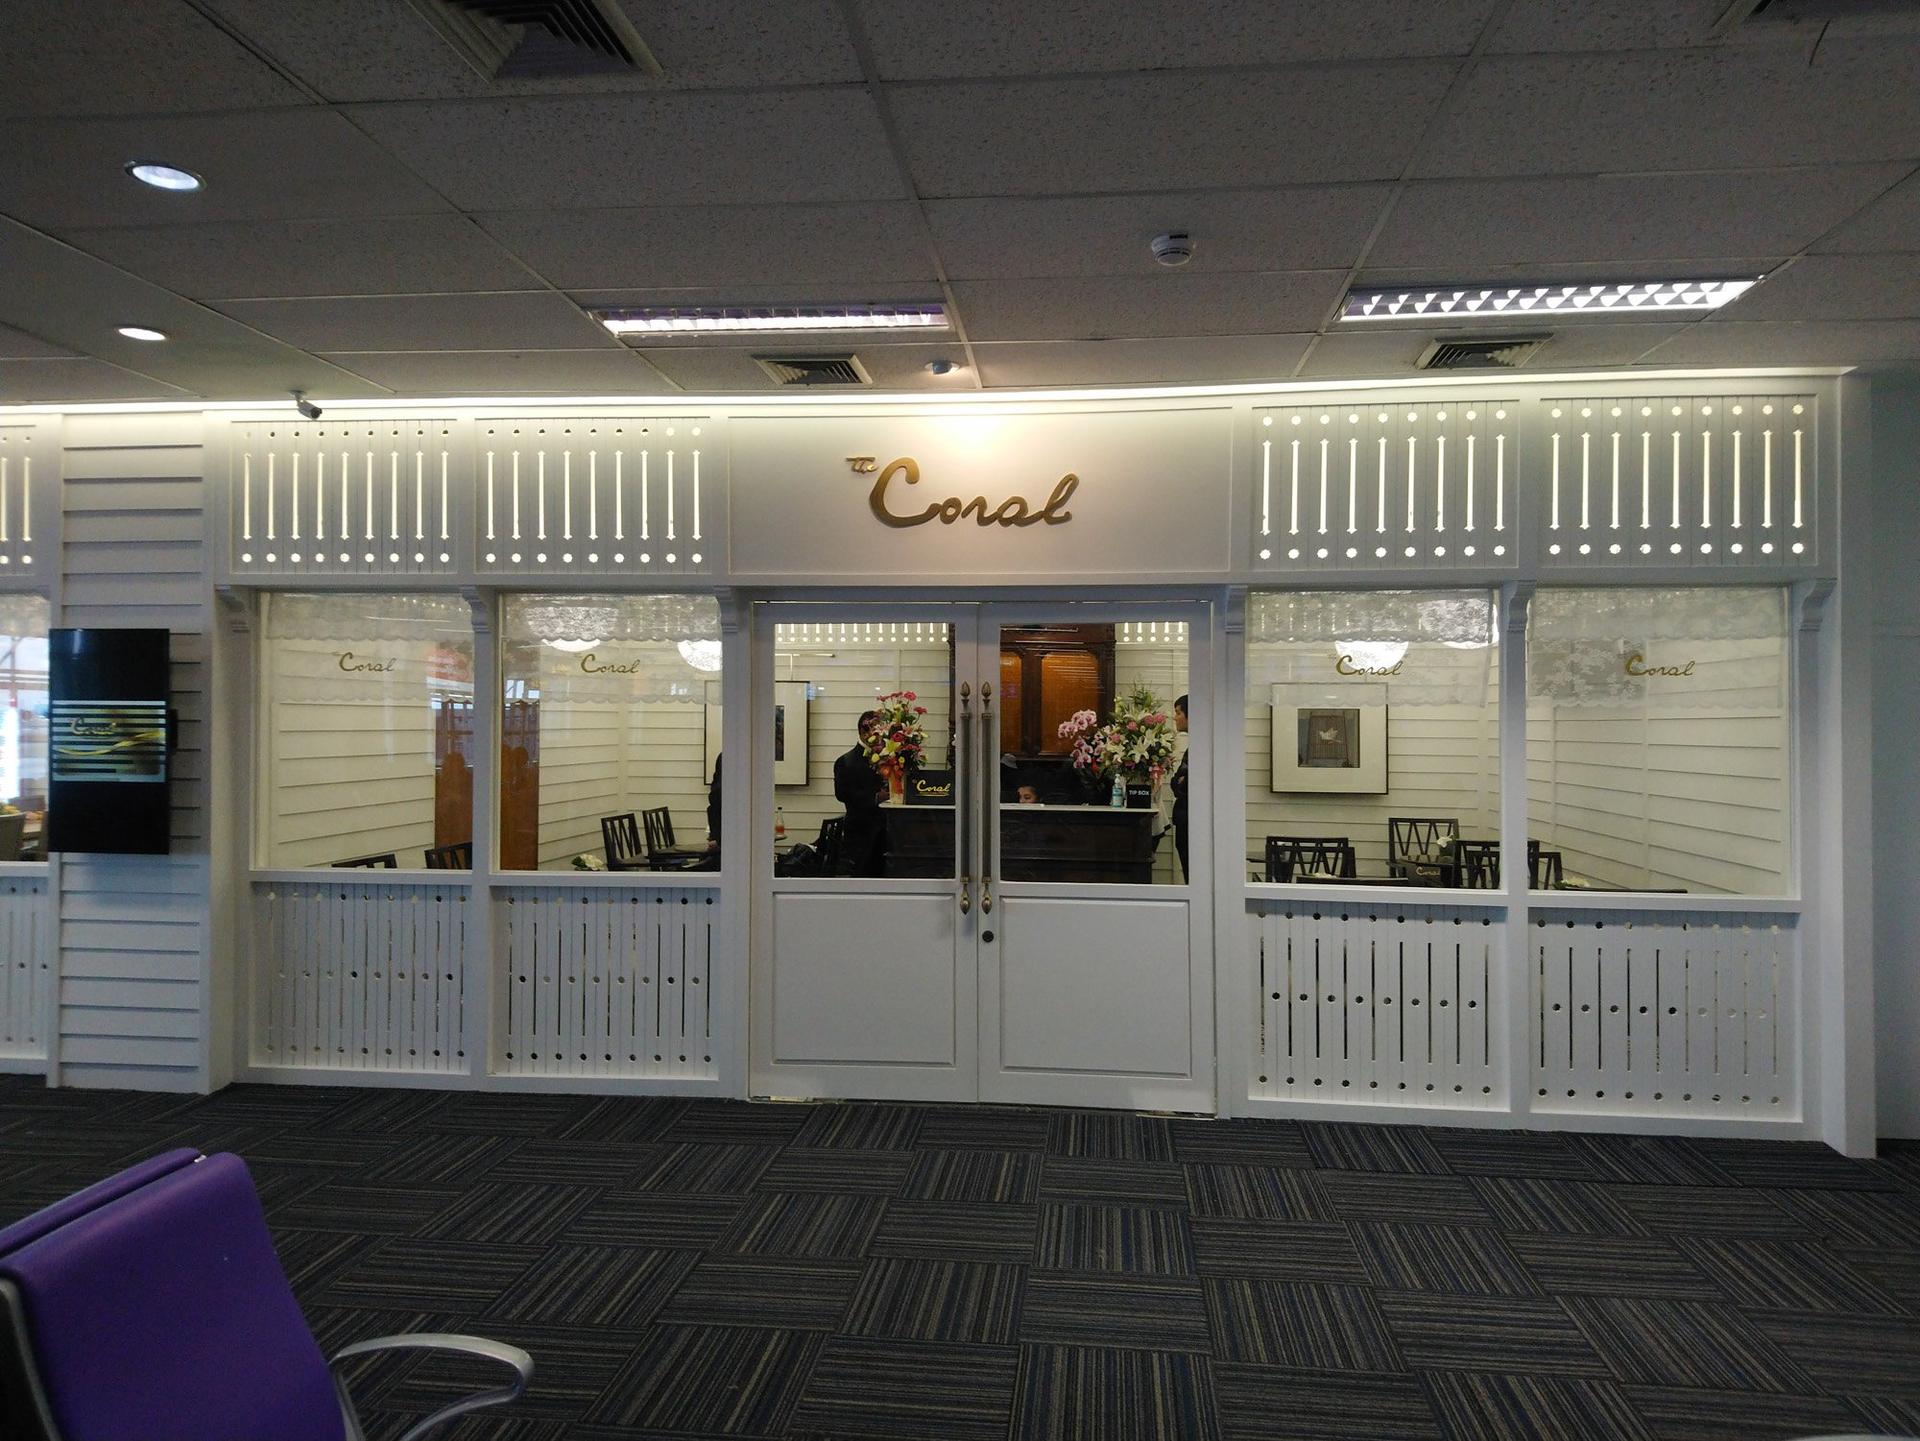 The Coral Executive Lounge image 18 of 30